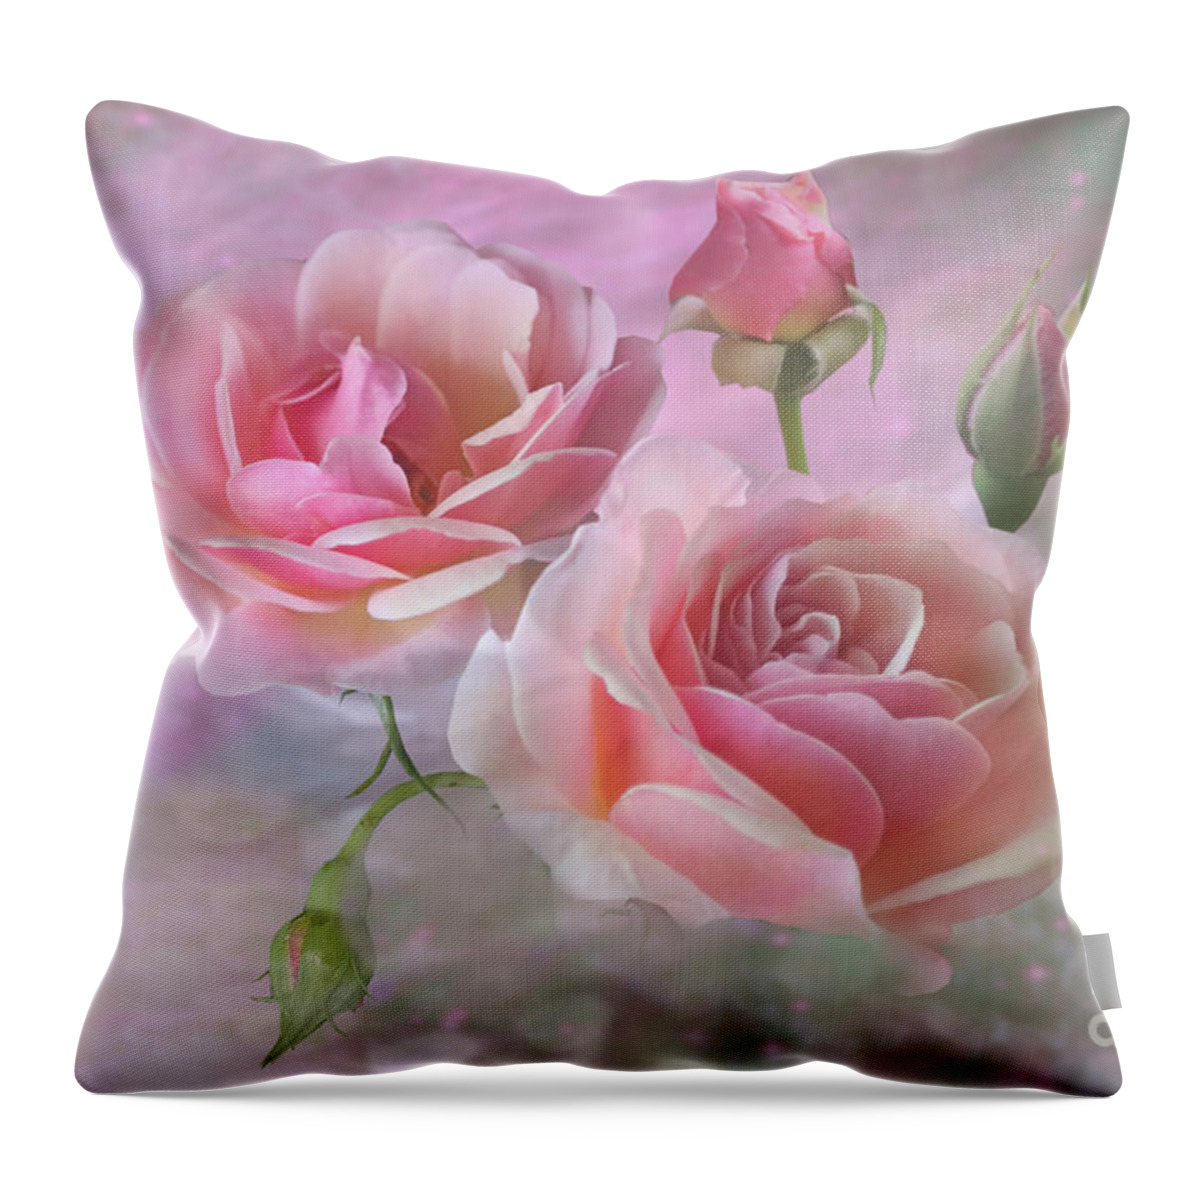 Pink Roses Throw Pillow featuring the mixed media Pink Rose Duet by Morag Bates